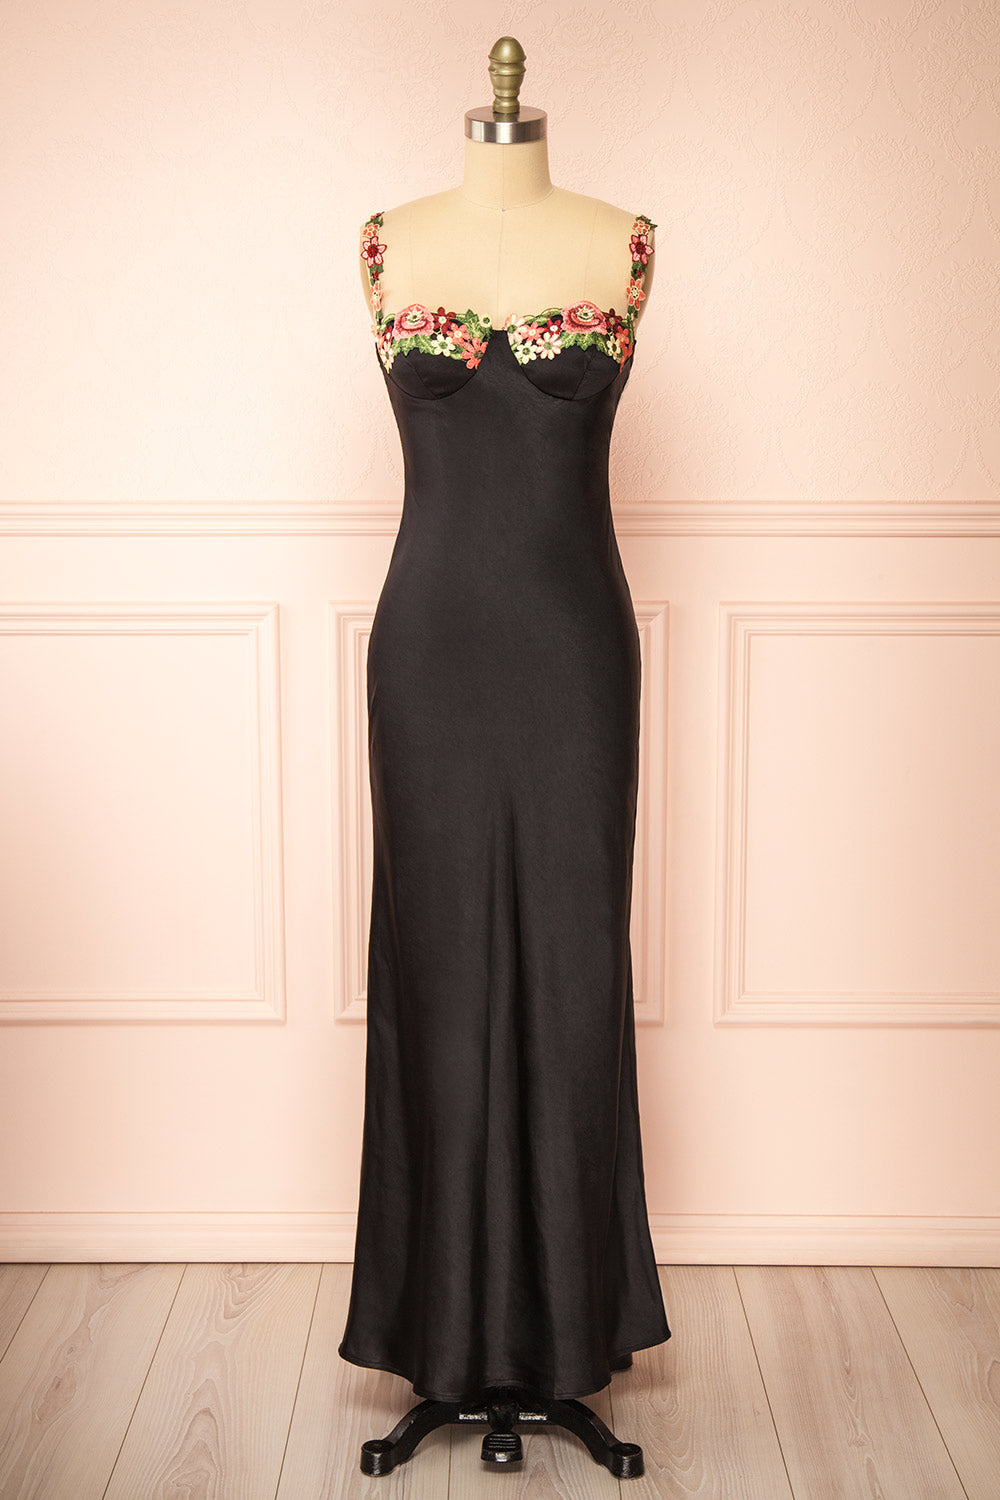 Ramona Black Slip Dress w/ Floral Embroidery | Boutique 1861 front view